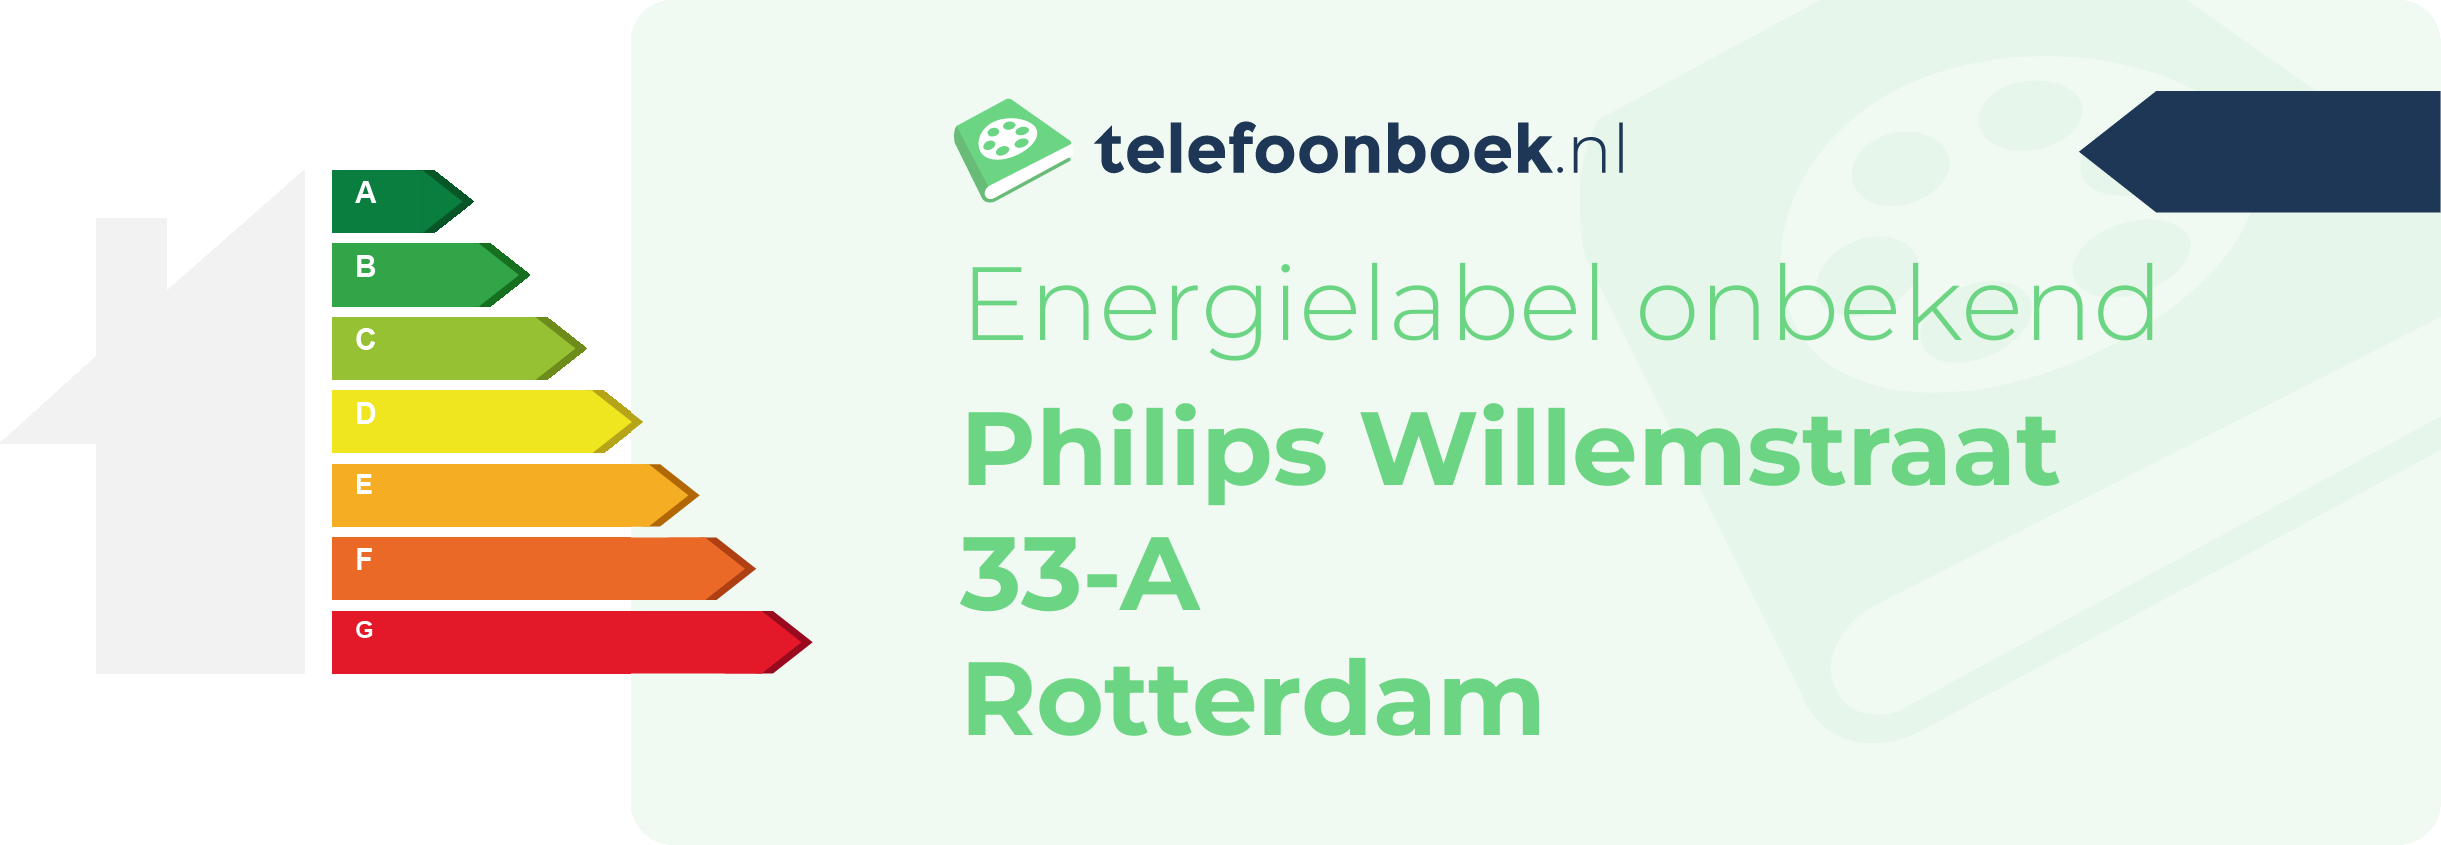 Energielabel Philips Willemstraat 33-A Rotterdam